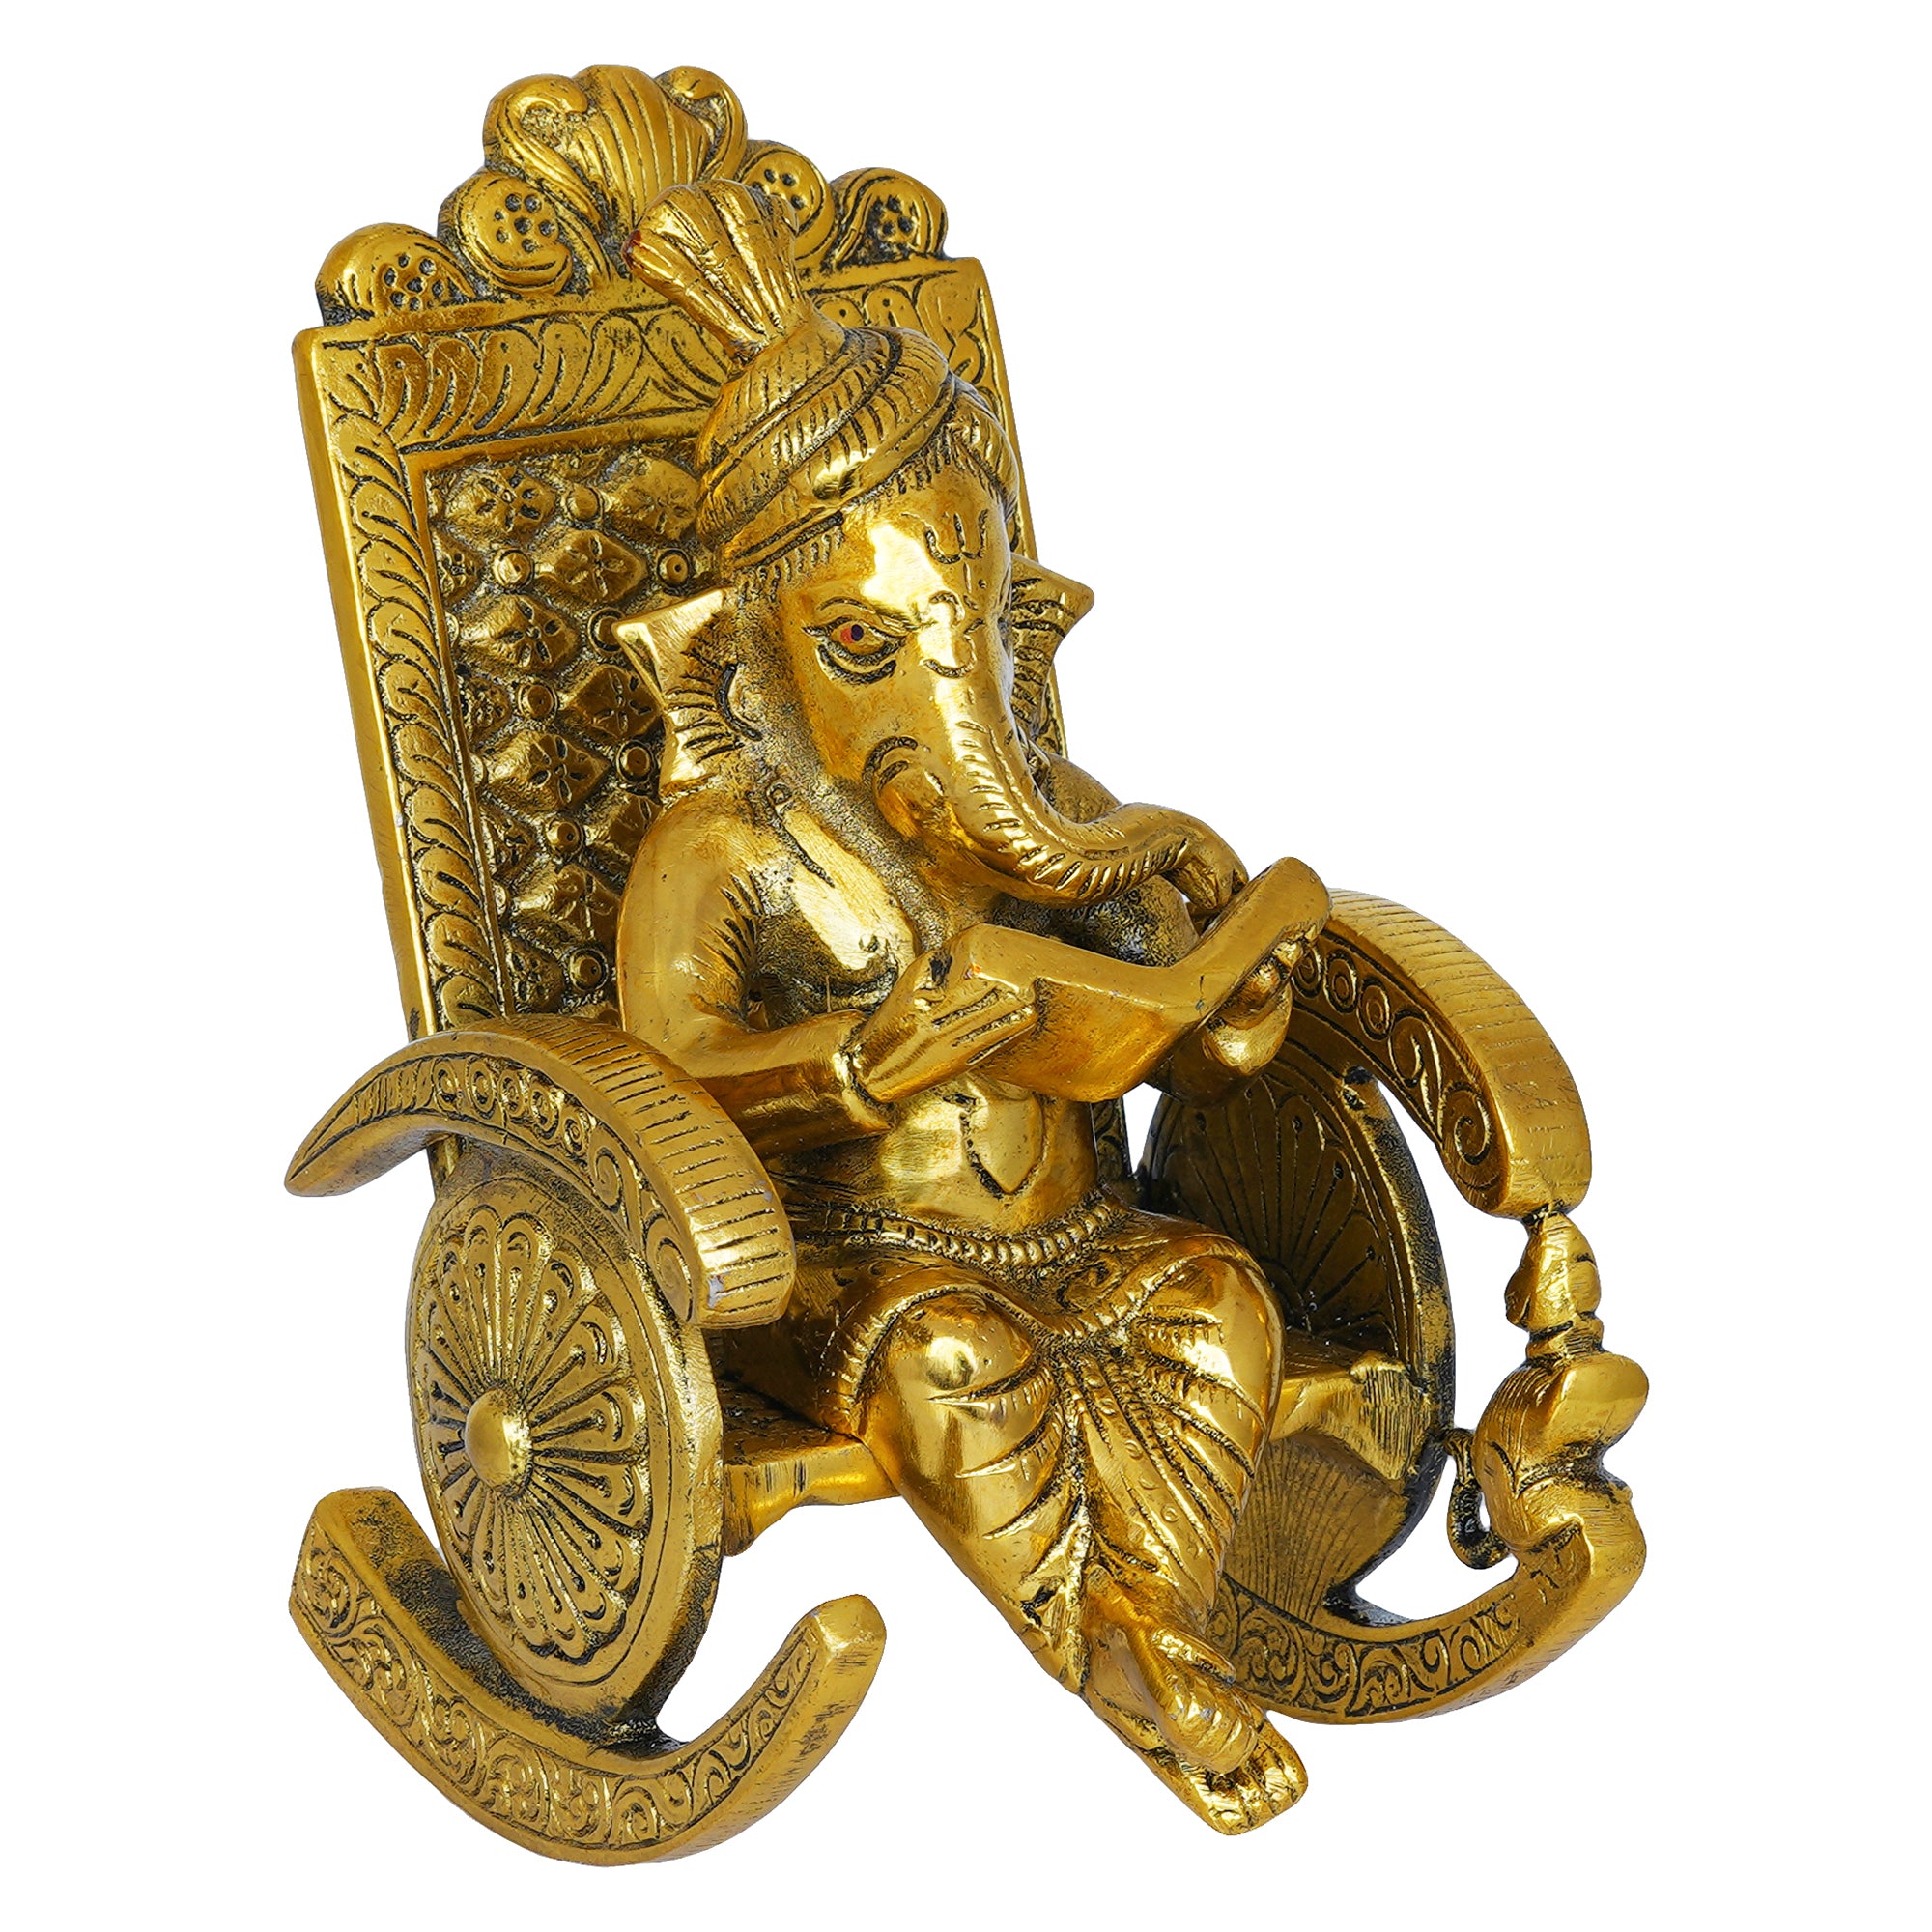 Golden Metal Handcrafted Lord Ganesha Idol Reading Book on Rocking Chair 2